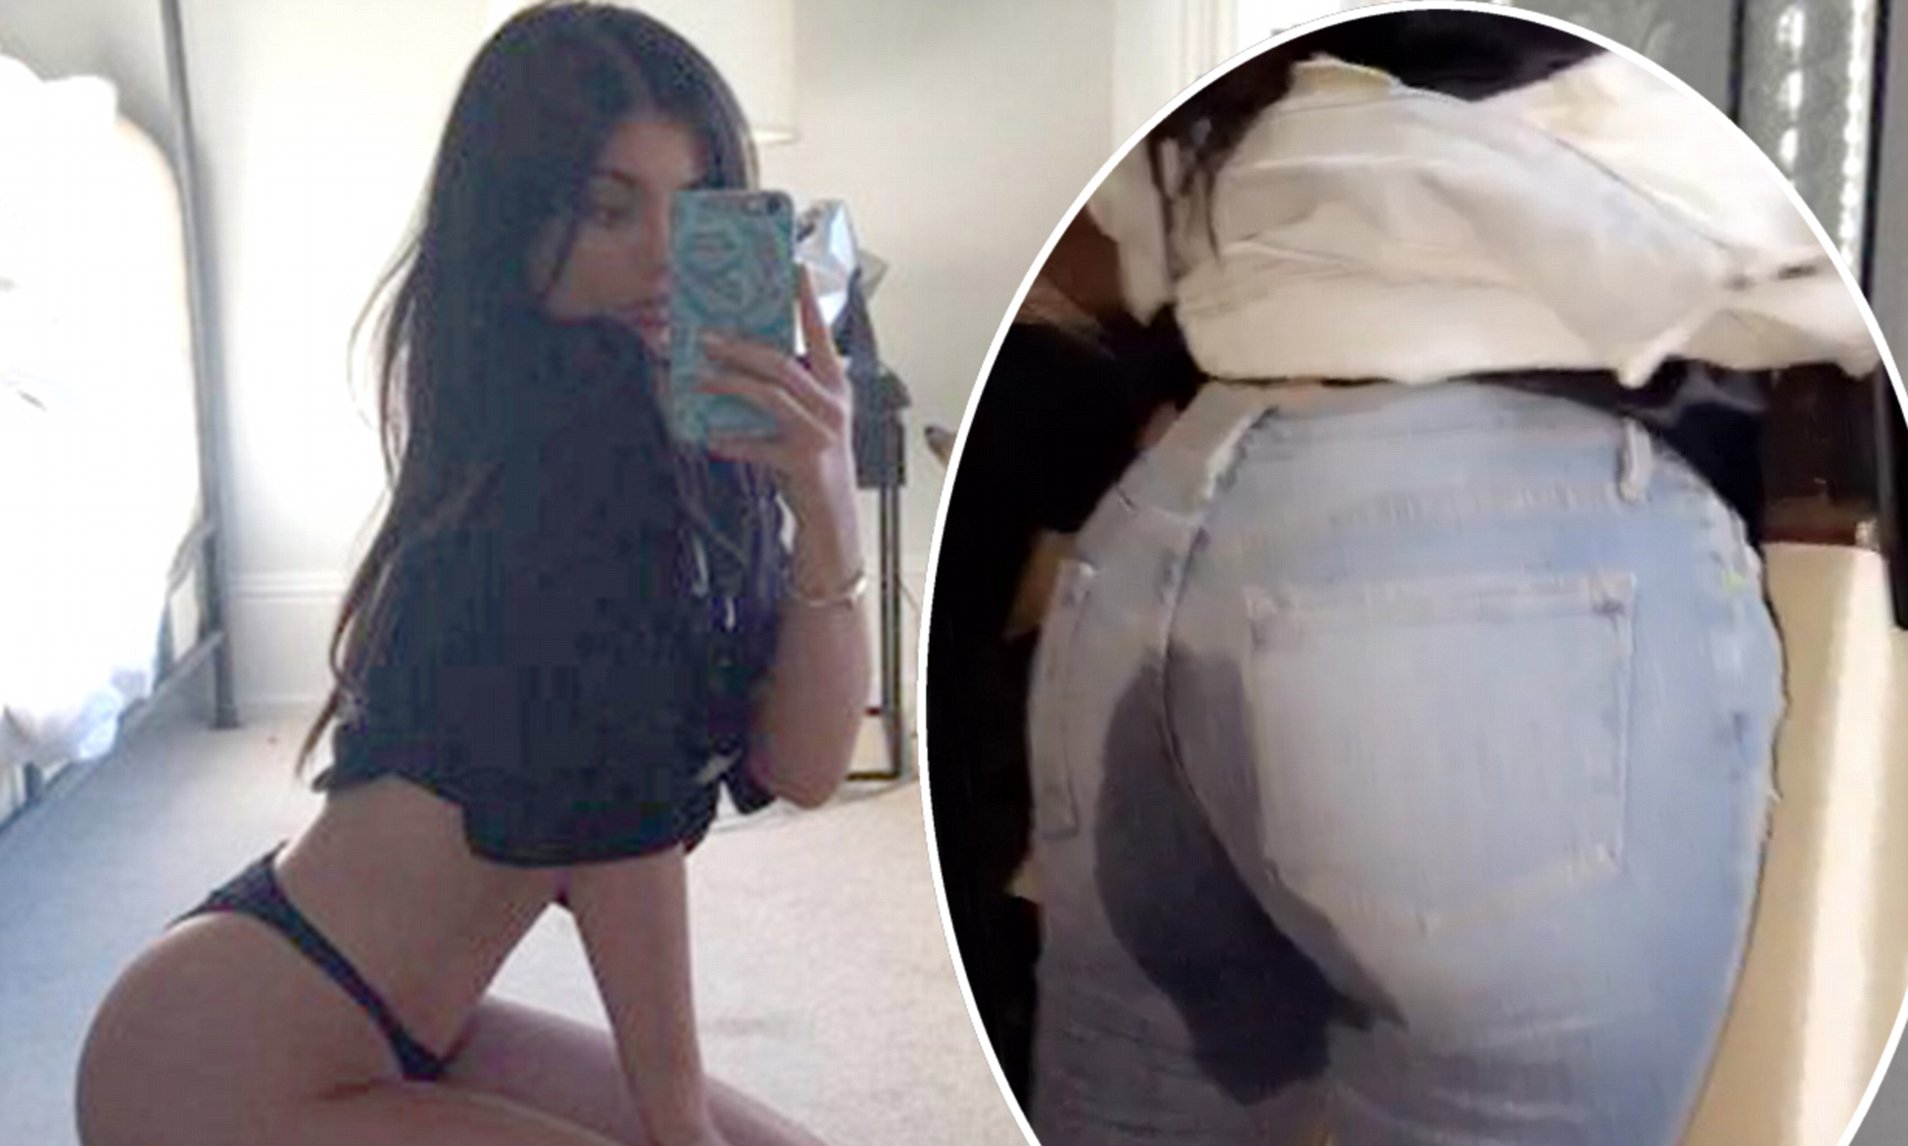 ashraf nawab recommends kylie jenner bare ass pic